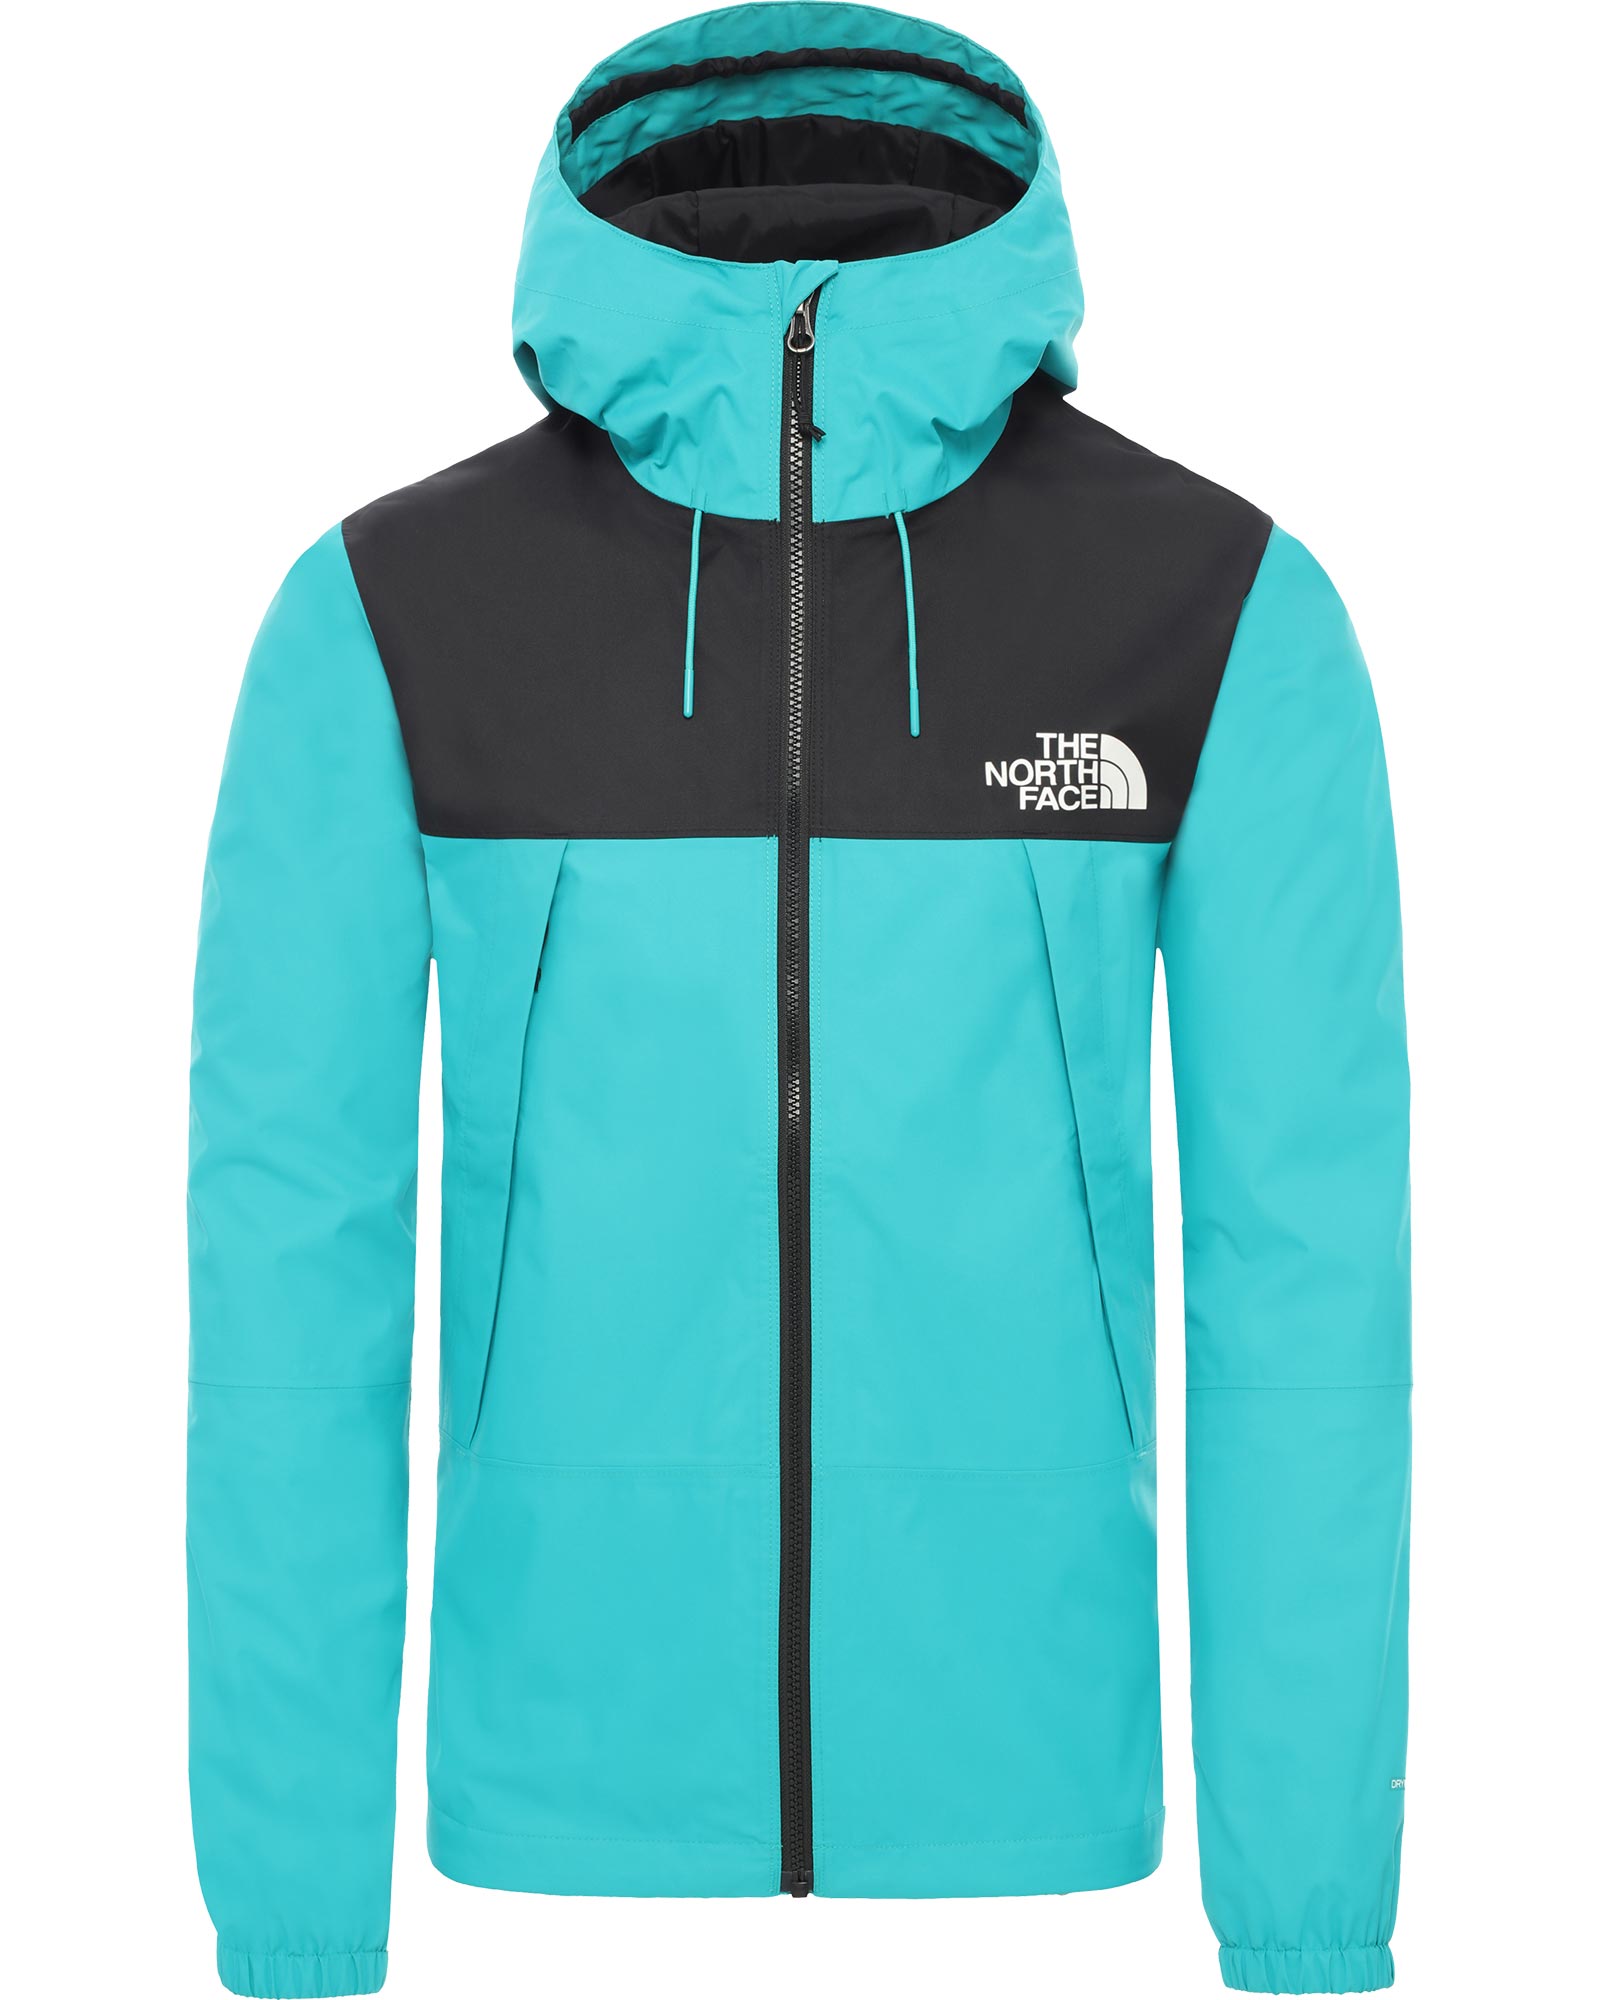 The North Face 1990 Mountain Q Mens Jacket